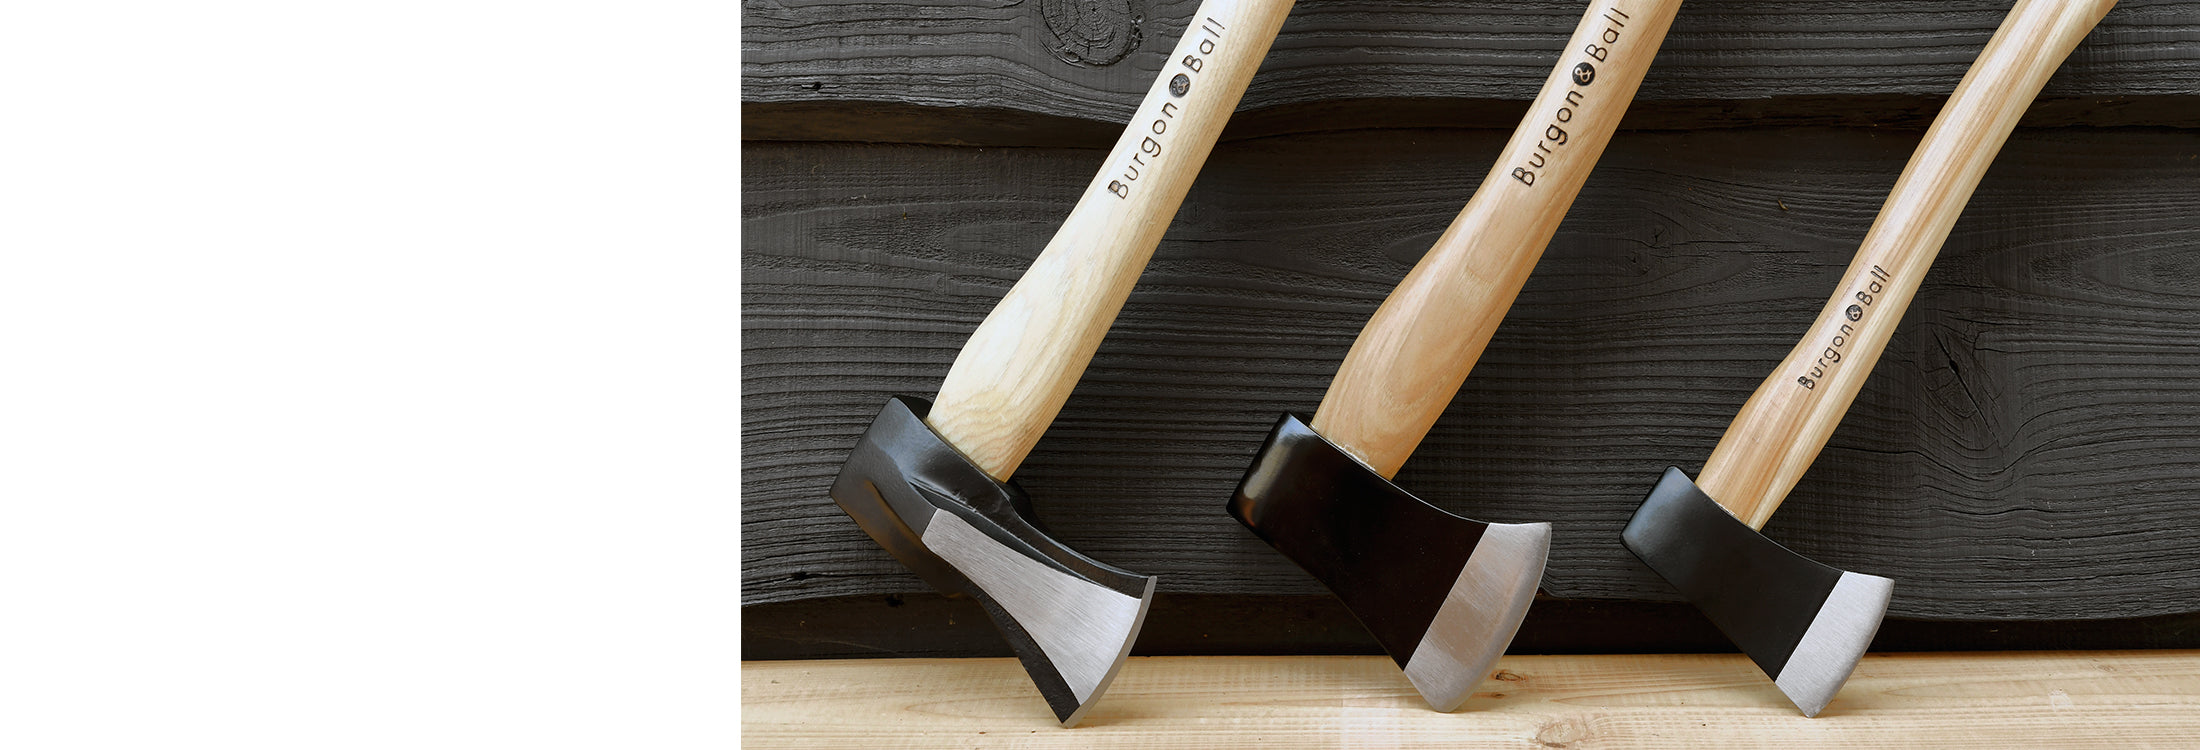 Axes and Wood Cutting Tools